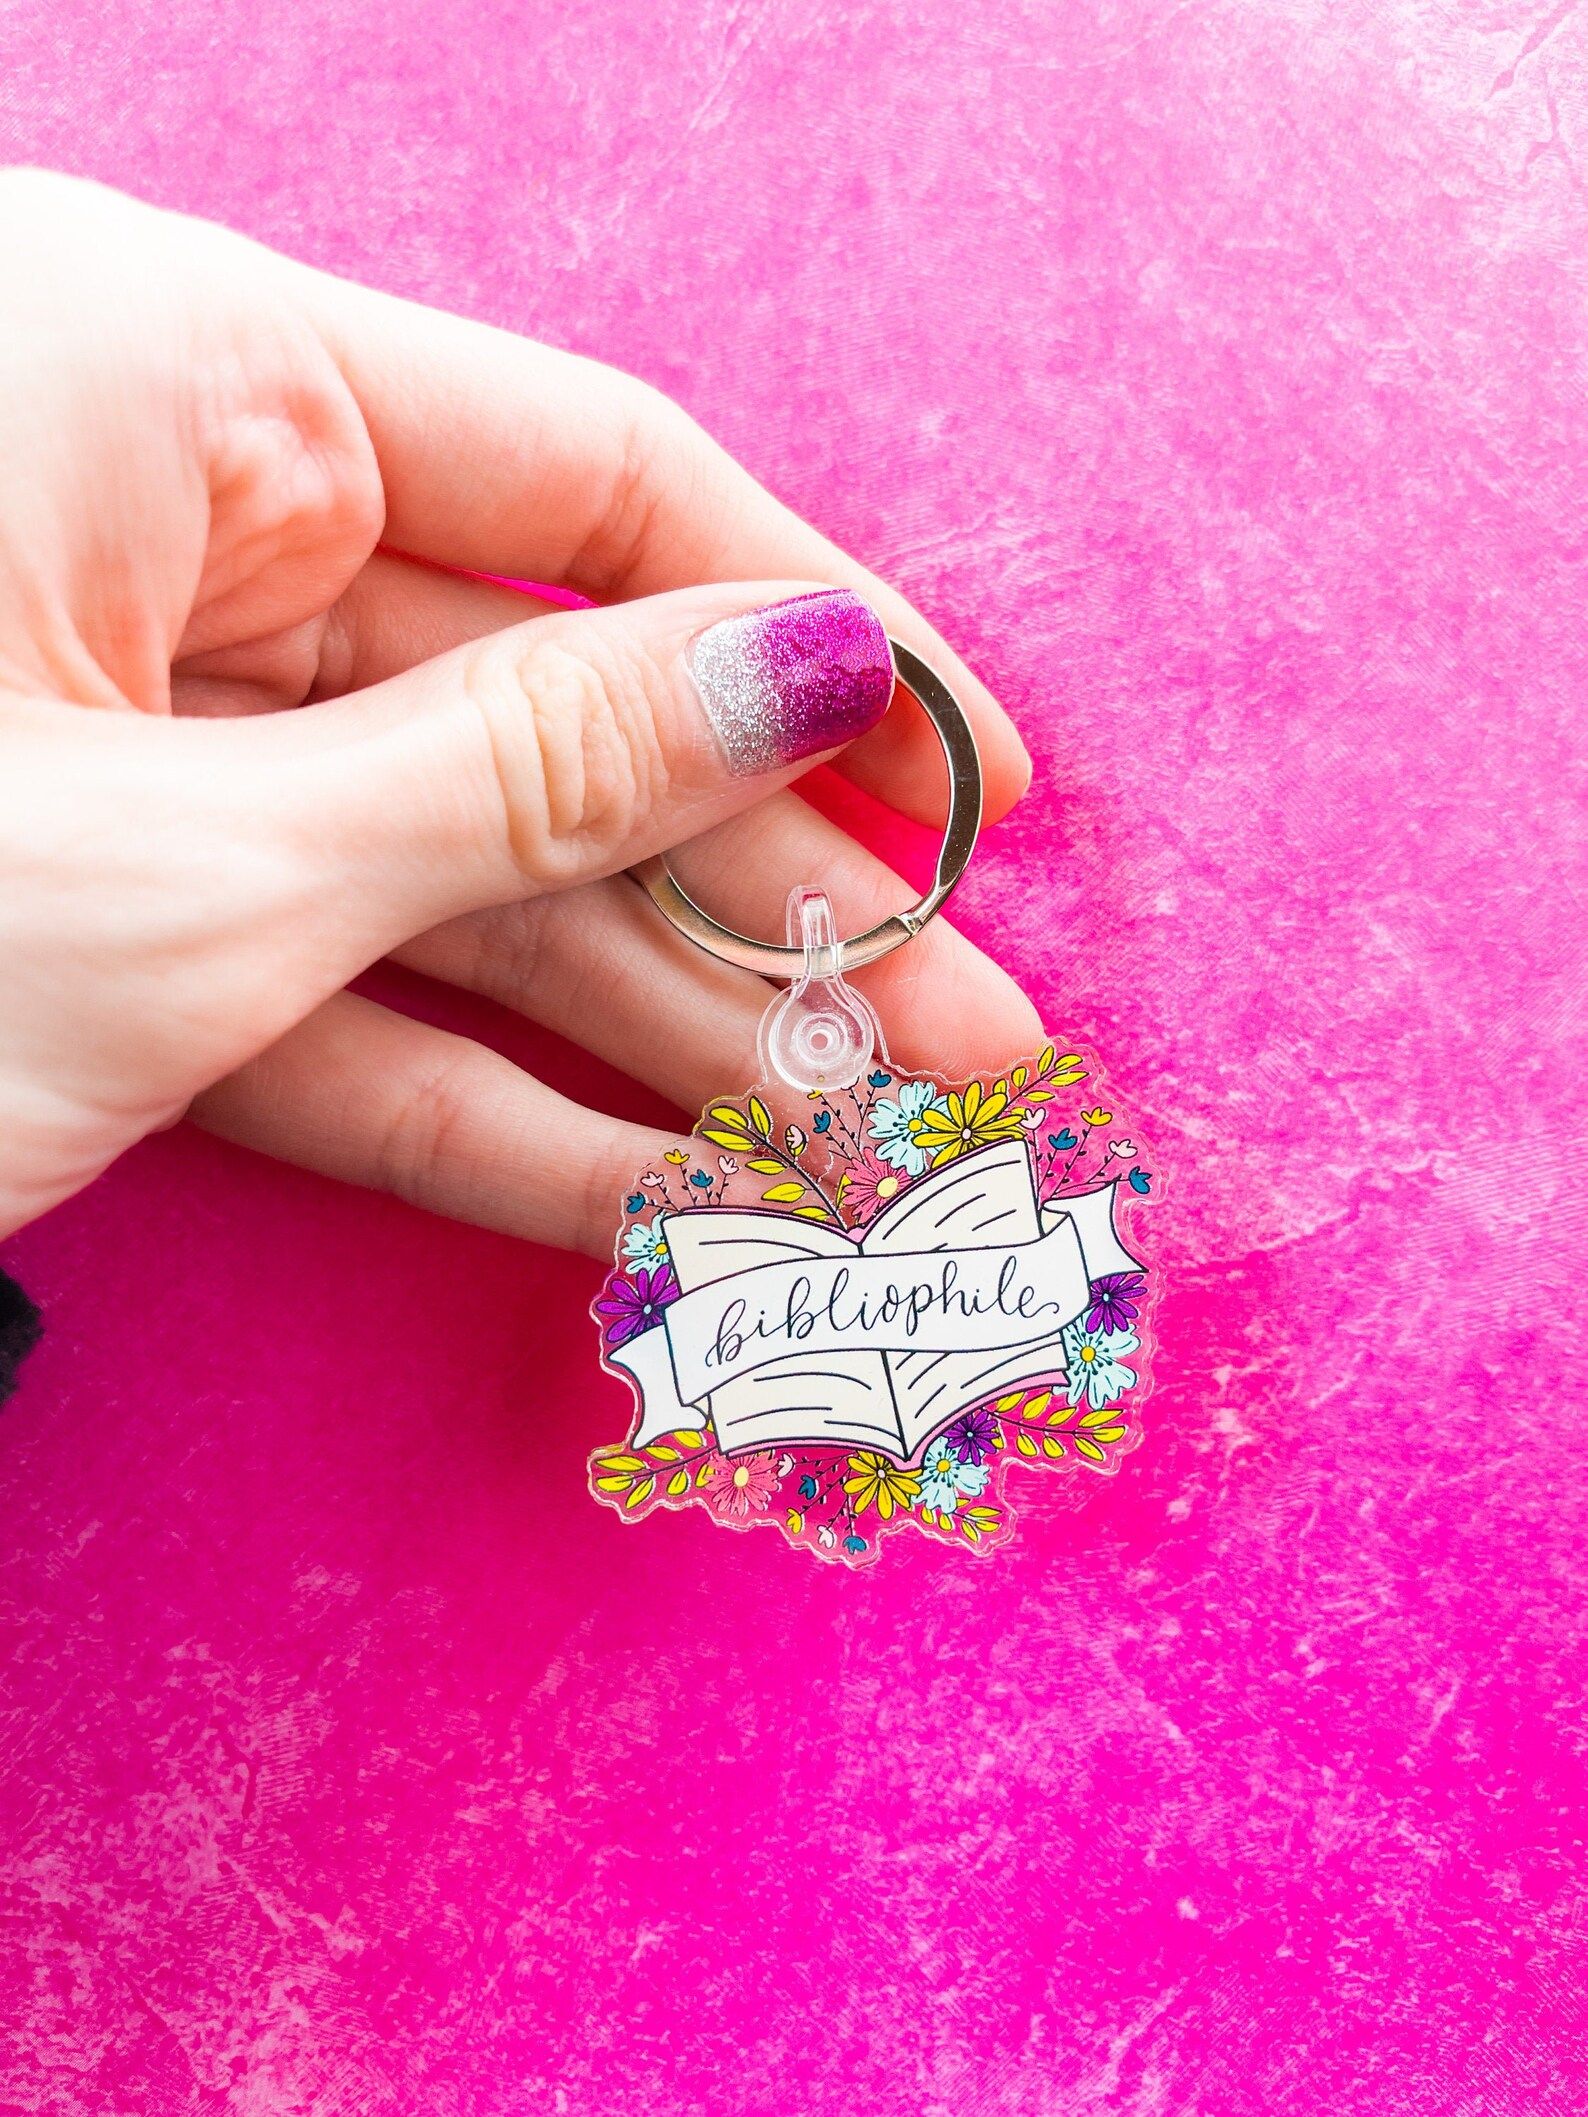 an acrylic keychain depicting flowers, an open book, and a banner that reads "bibliophile"